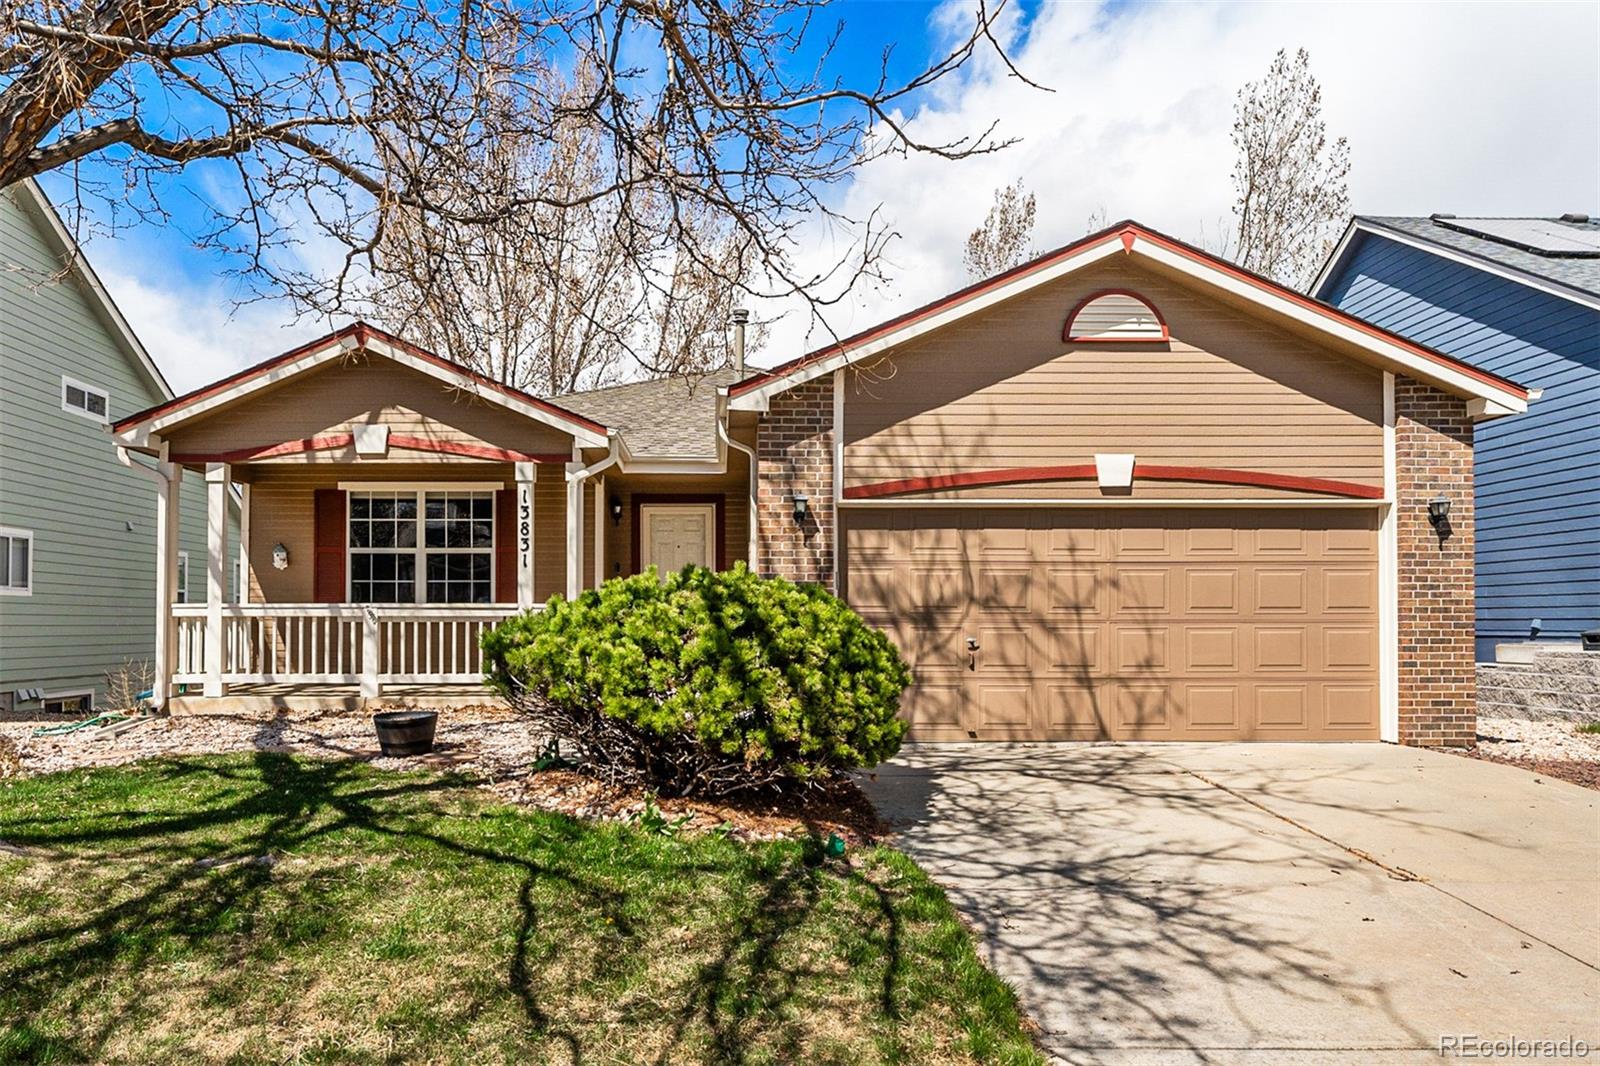 13831 W 64th Drive, arvada MLS: 5445496 Beds: 4 Baths: 3 Price: $730,000